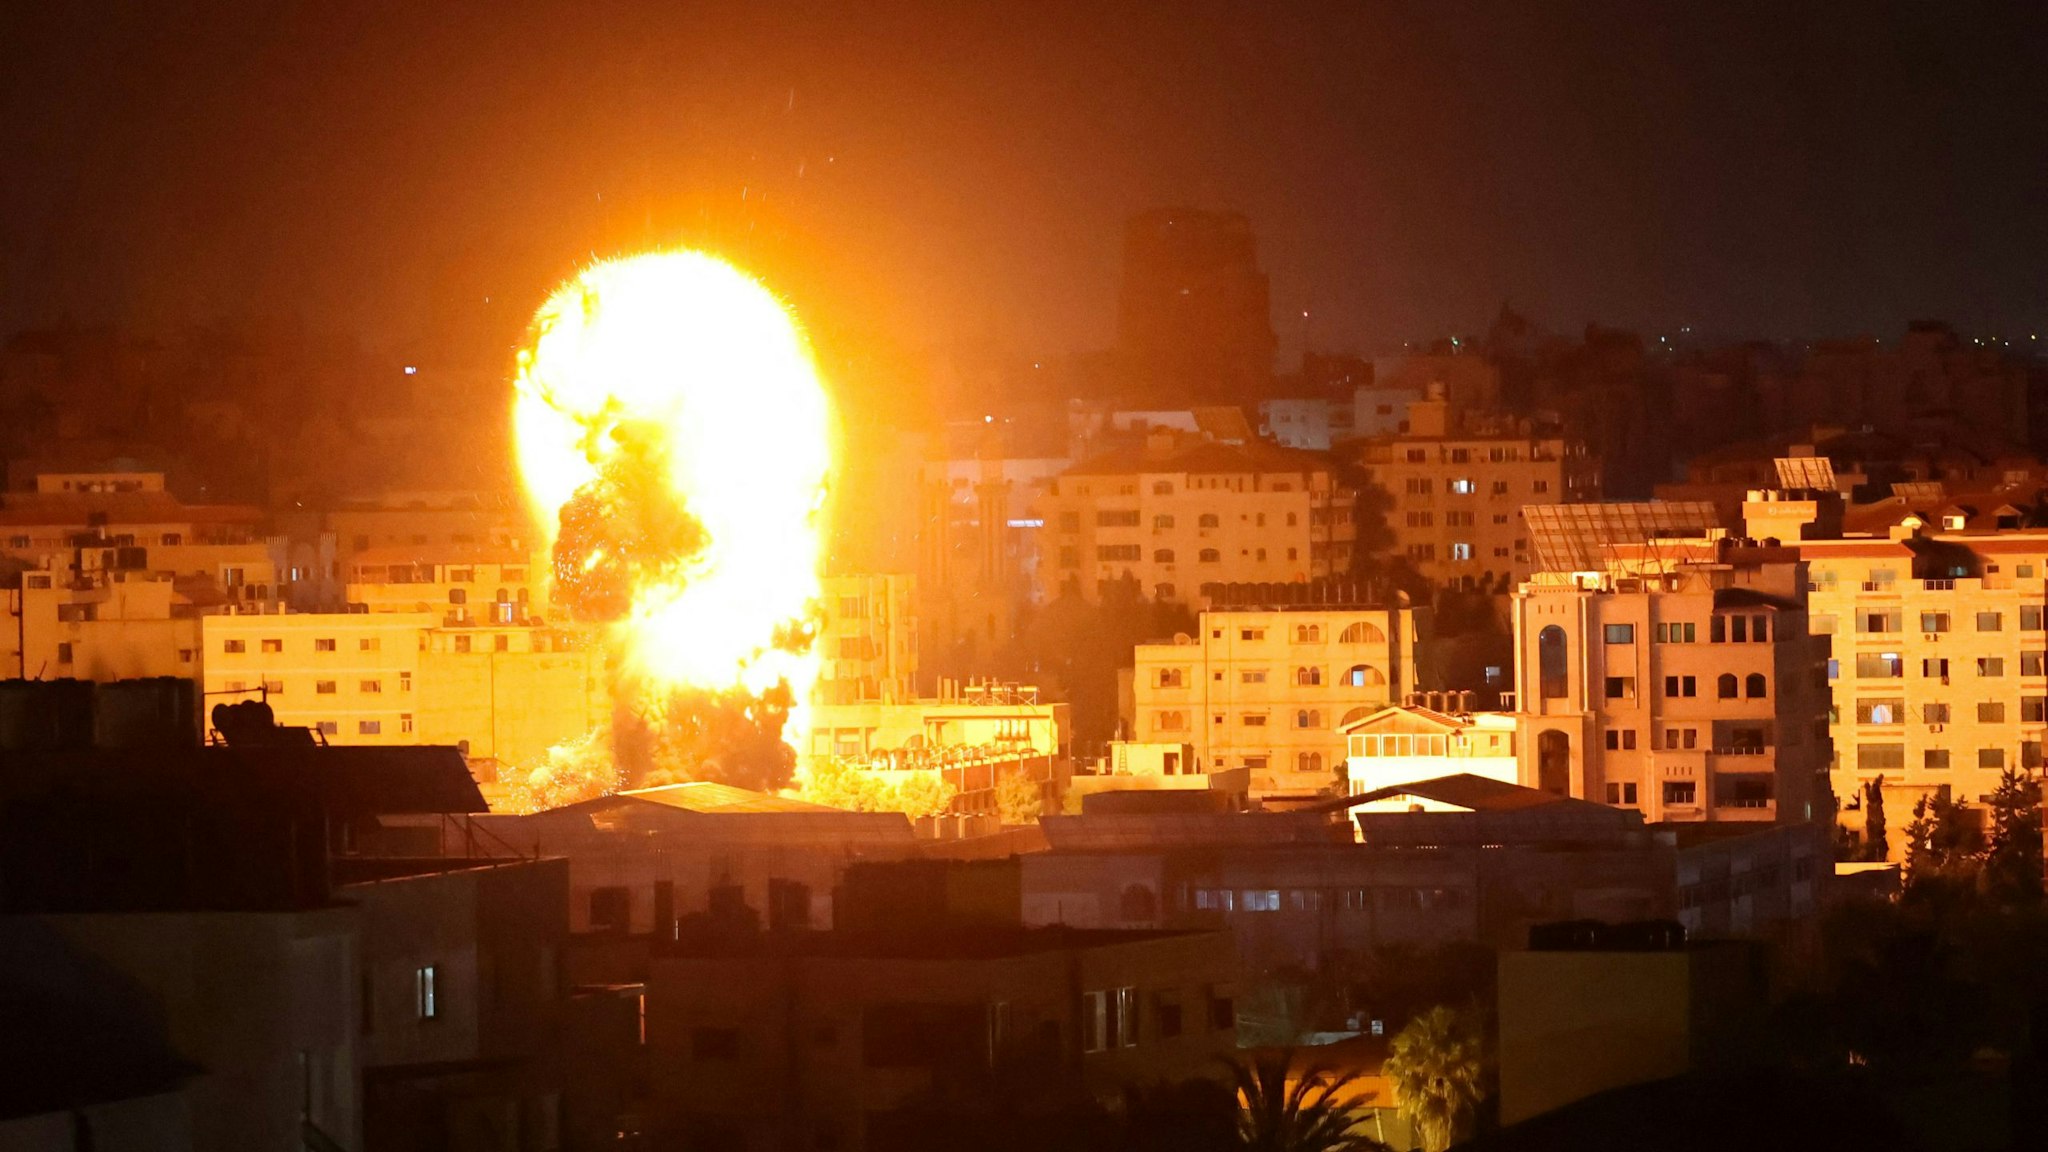 Fire and smoke rise above buildings in Gaza City as Israeli warplanes target the Palestinian enclave, early on May 17, 2021. - Israeli warplanes bombarded the Gaza Strip overnight, said witnesses in the Palestinian enclave, from where armed groups have launched rockets into the Jewish state.